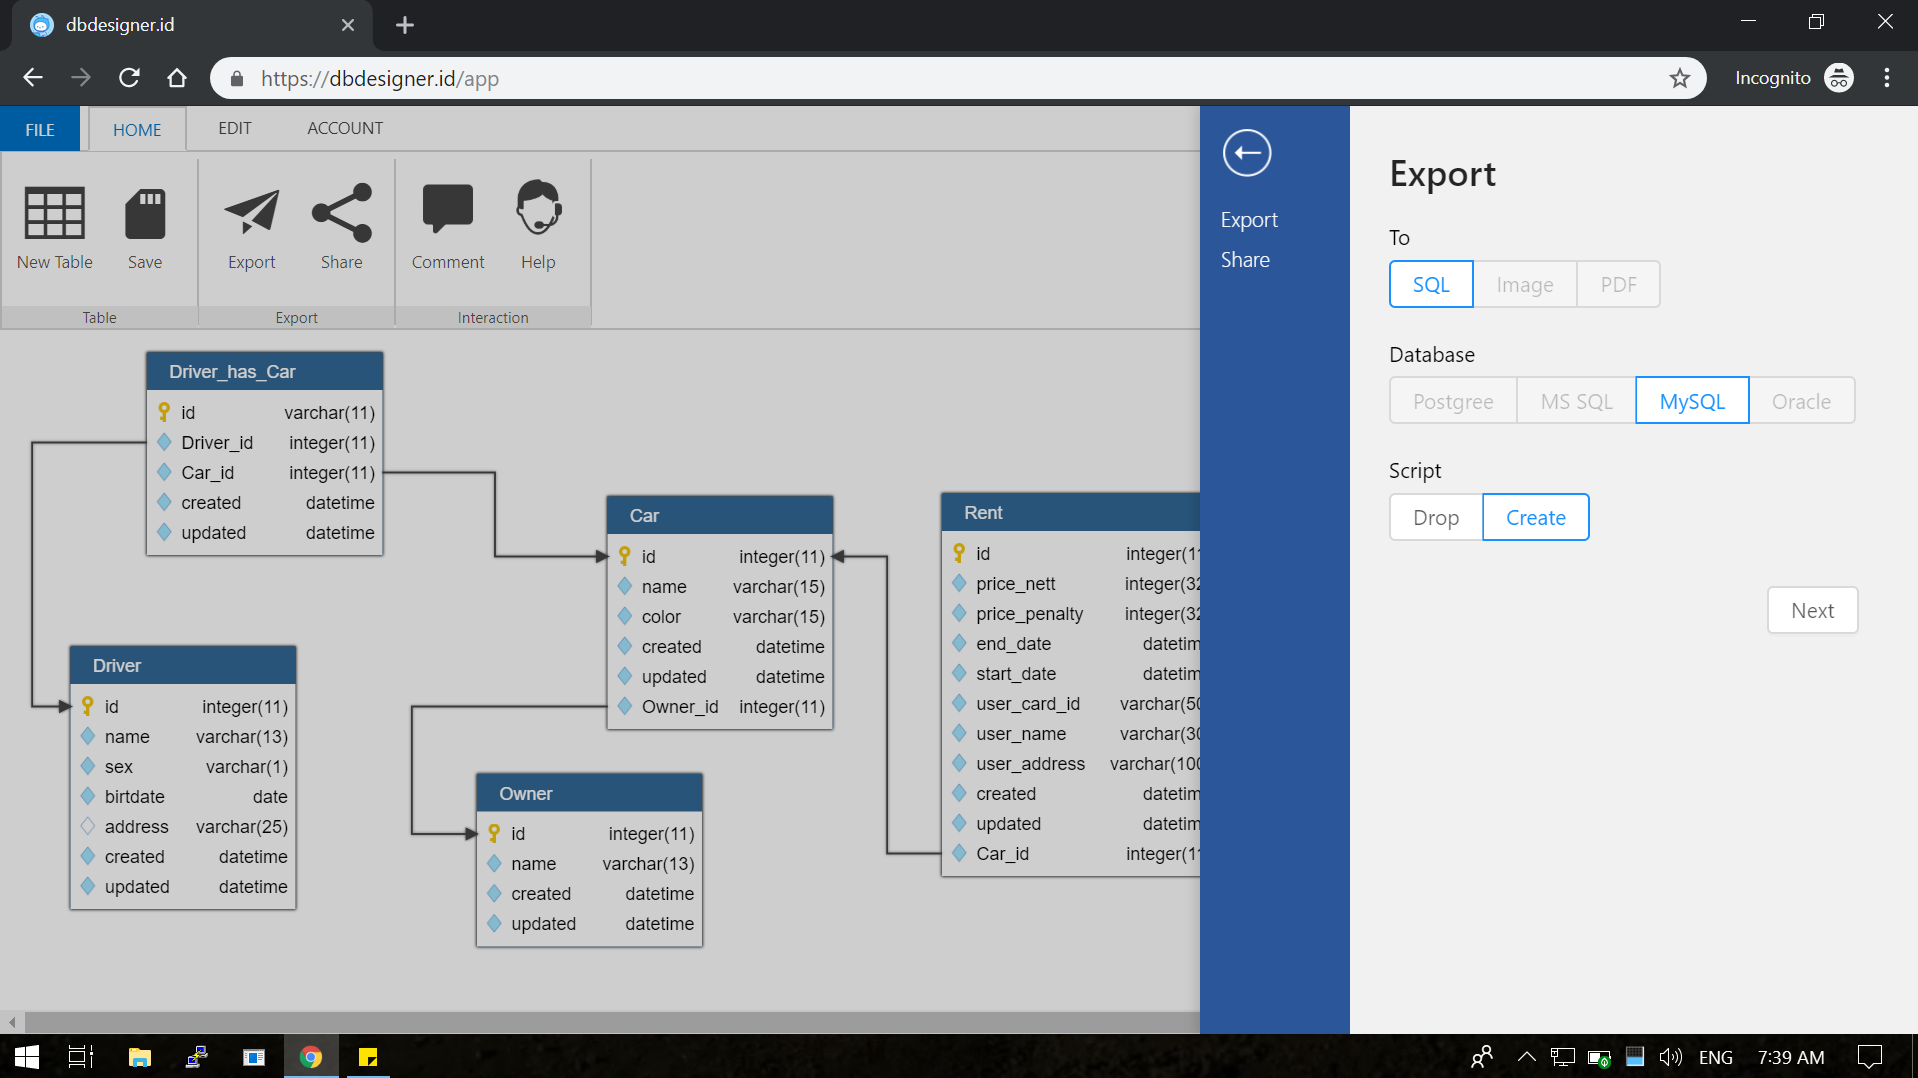 Export to database